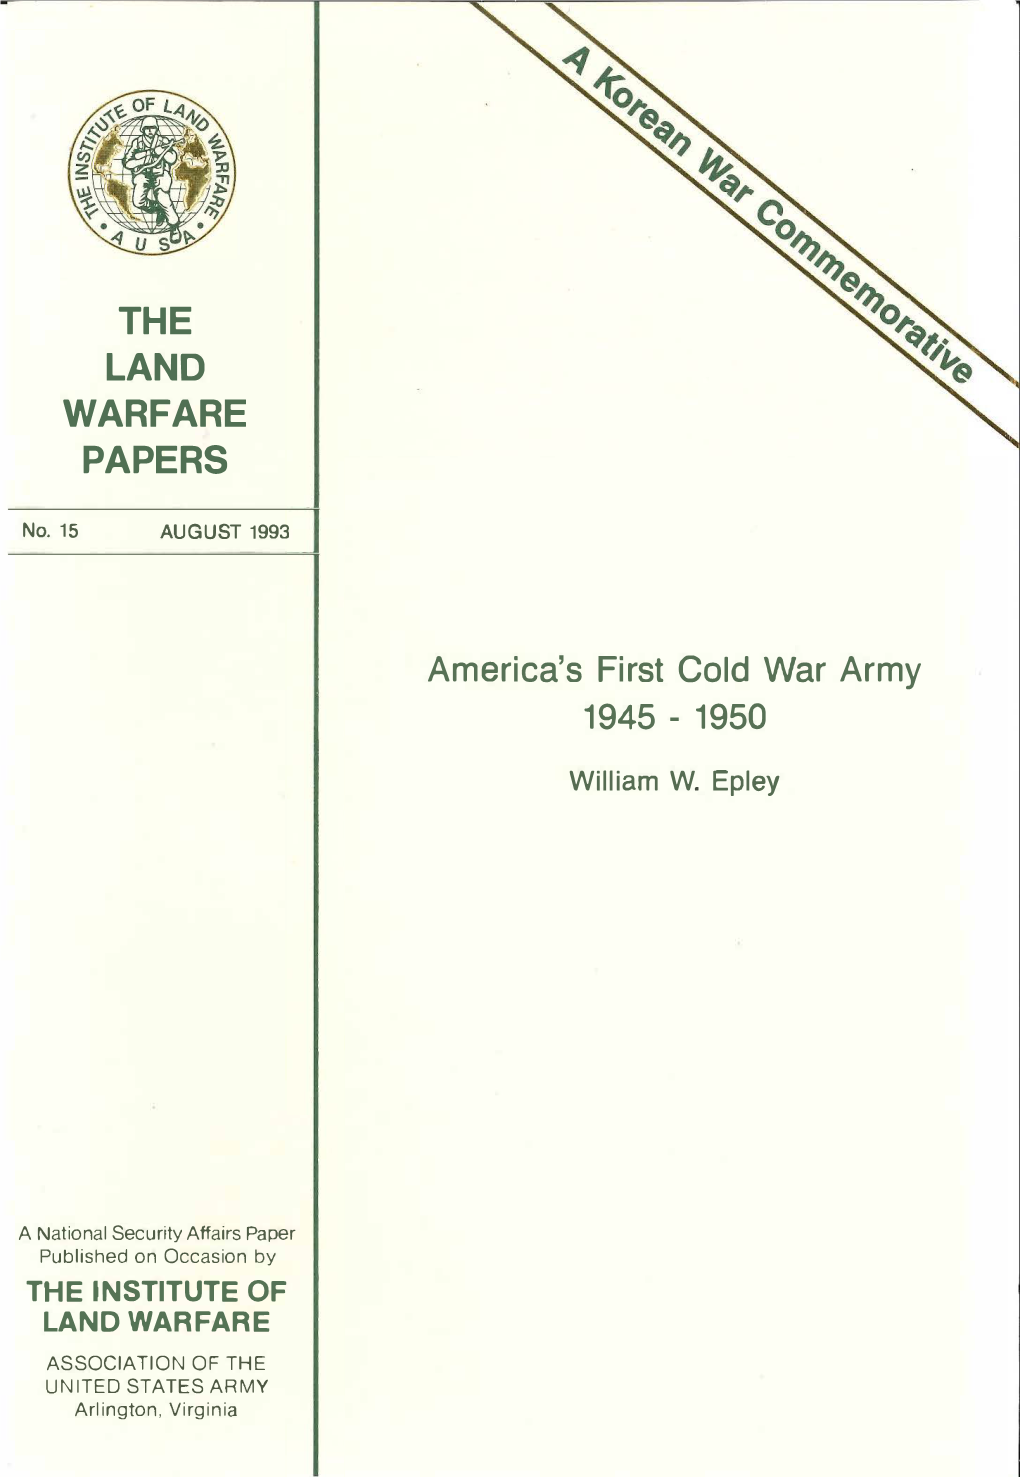 The Land Warfare Papers